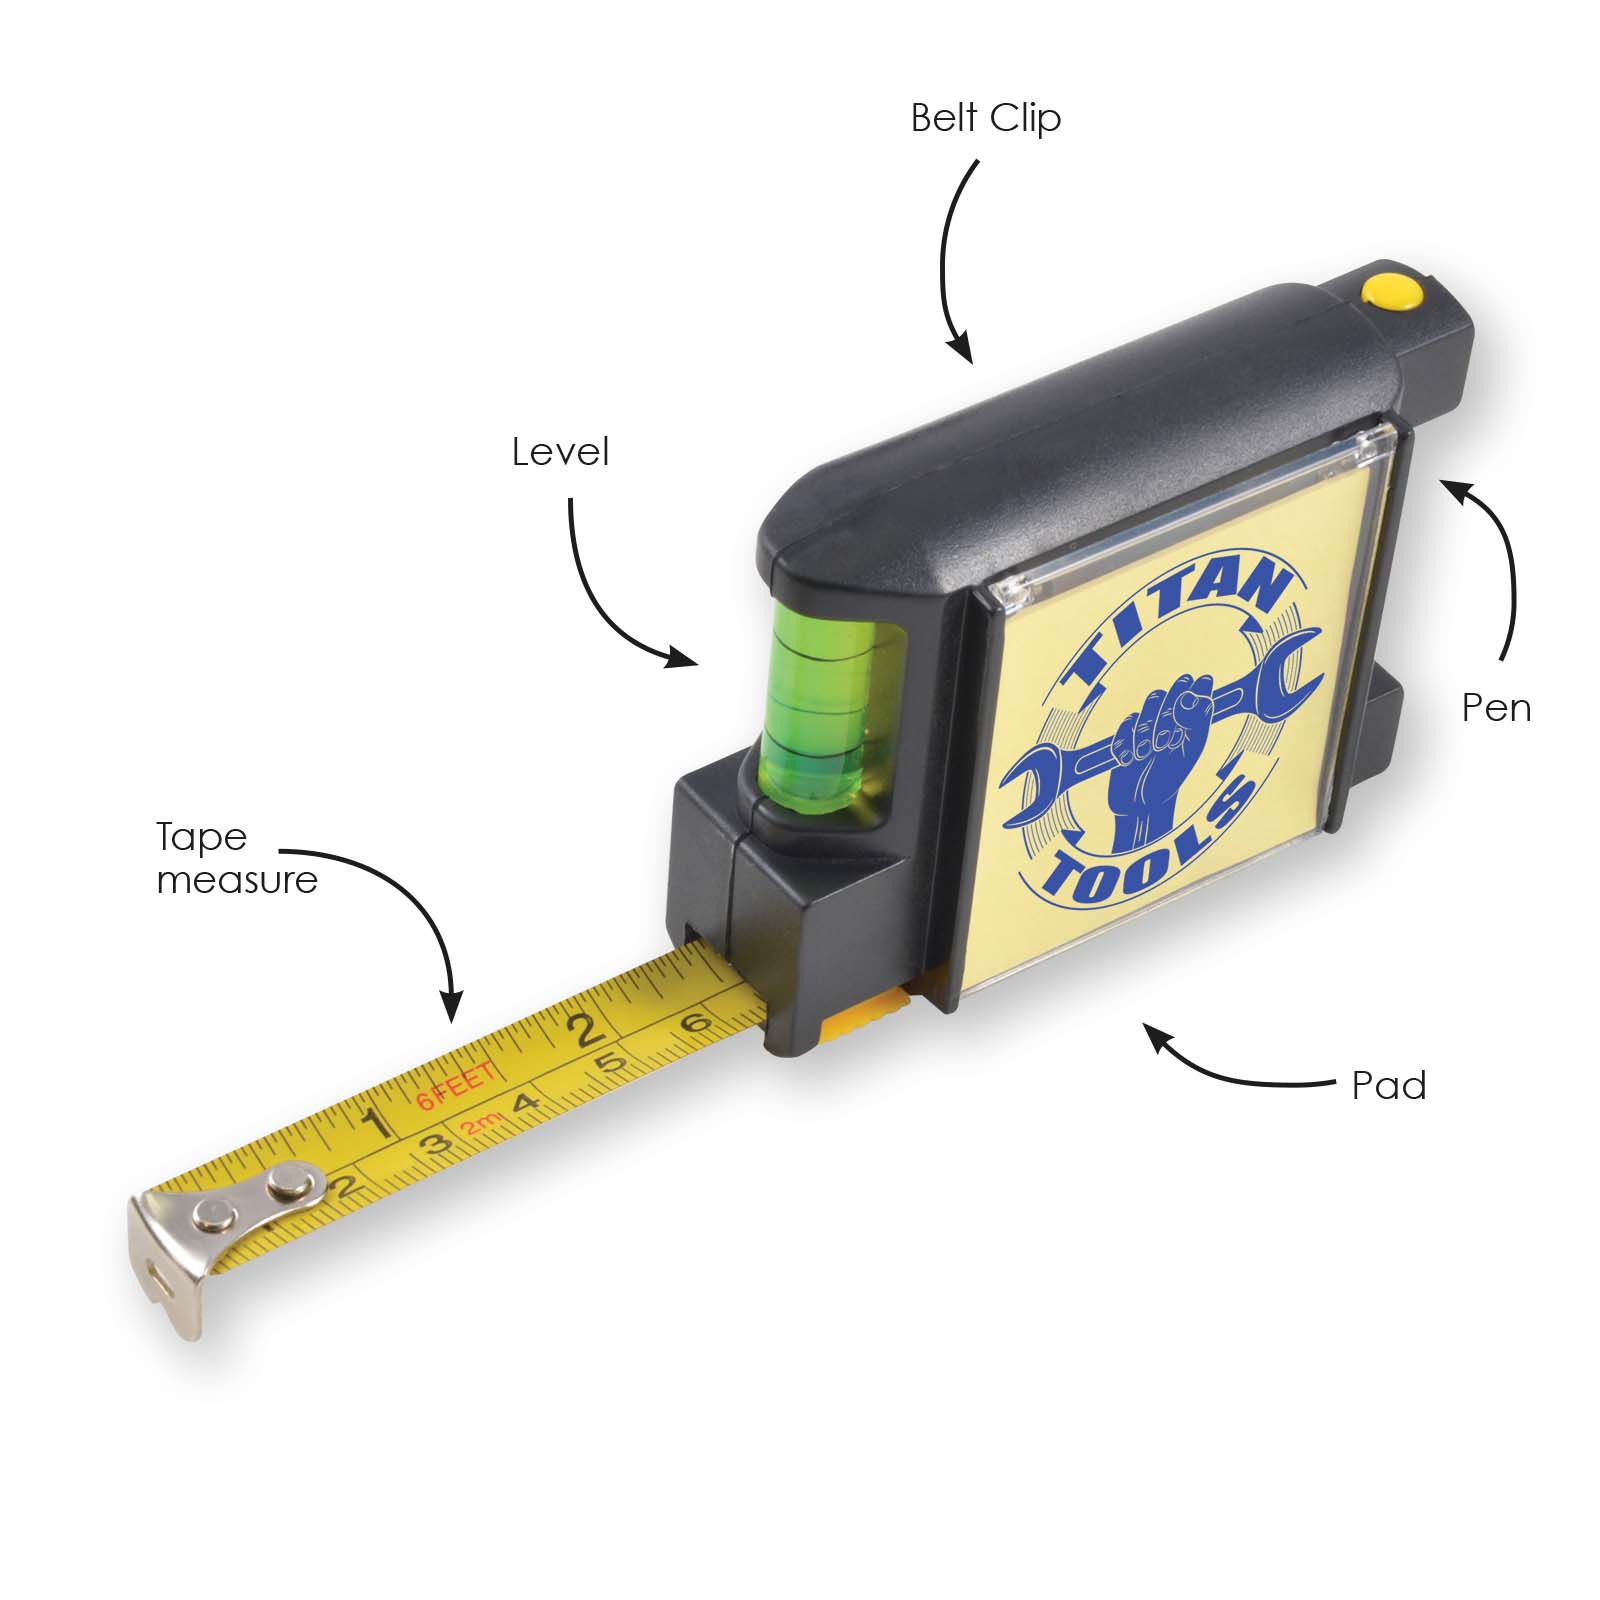 LL1402 - Contractor Tape Measure